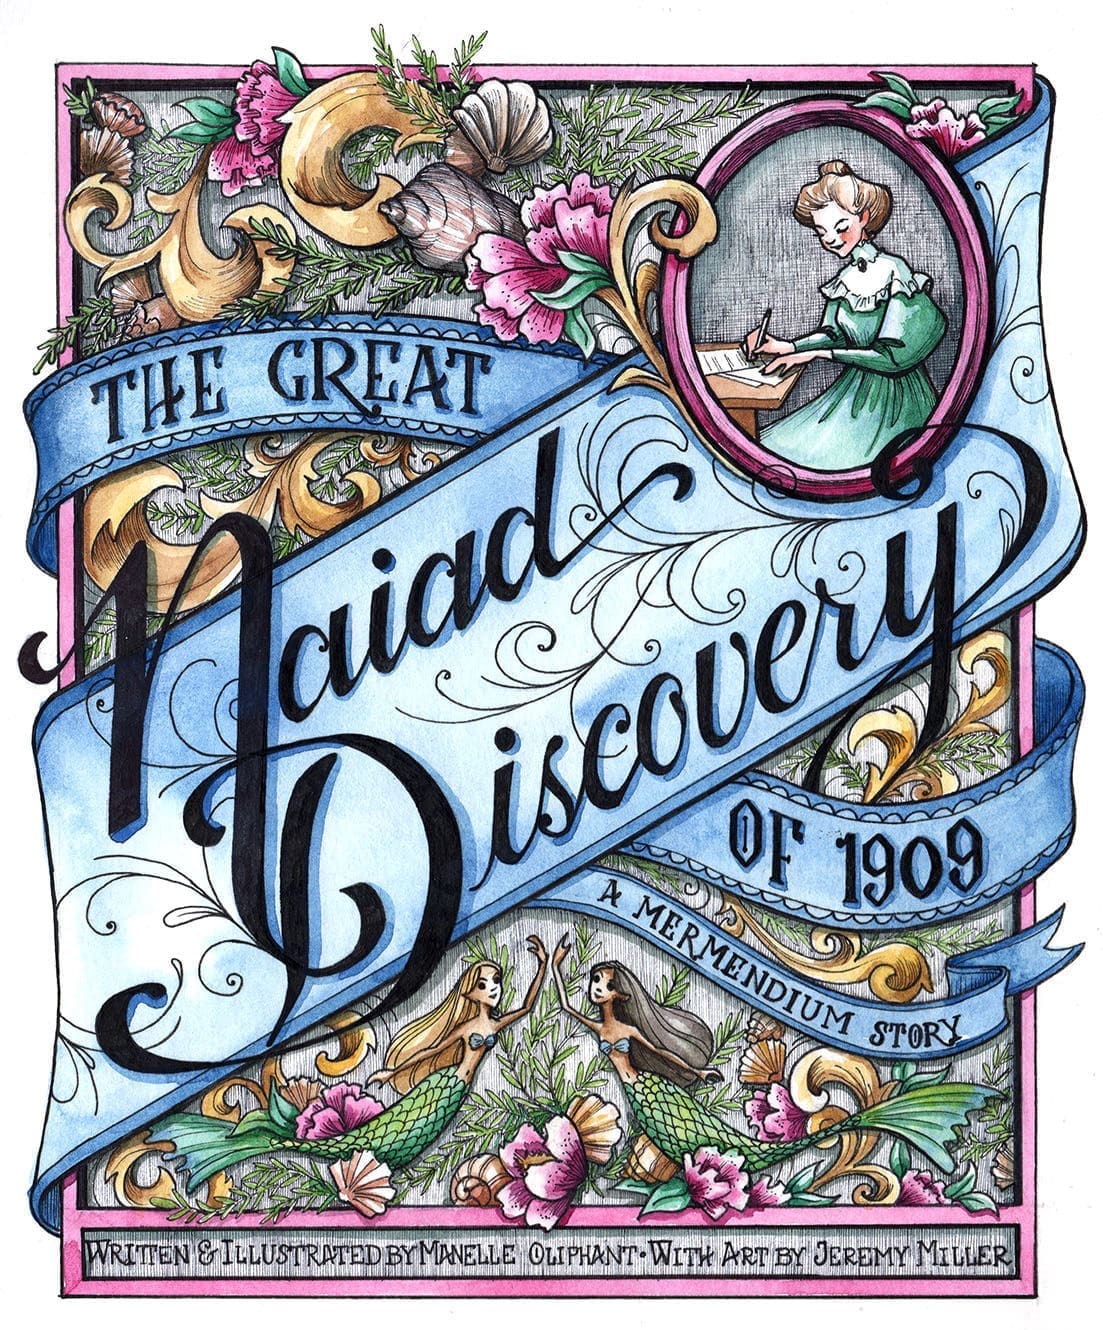 The Great Naiad Discovery of 1909